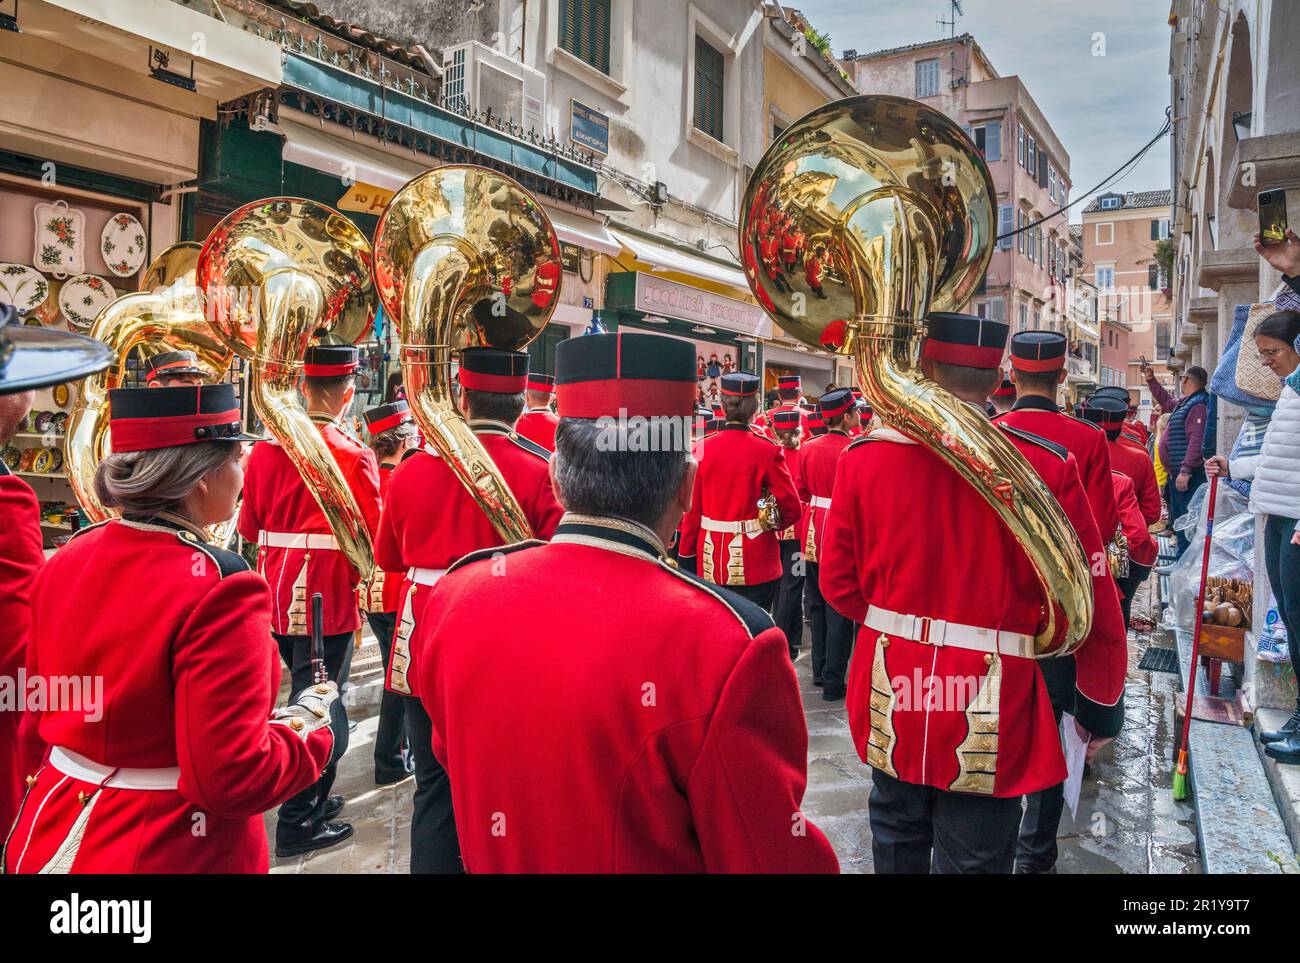 Sousaphone players of The Old Philharmonic marching band, performing at Nikiforou Theotoki street in Campiello (Old Town of Corfu) section, Holy Saturday, in town of Corfu, Corfu Island, Greece Stock Photo